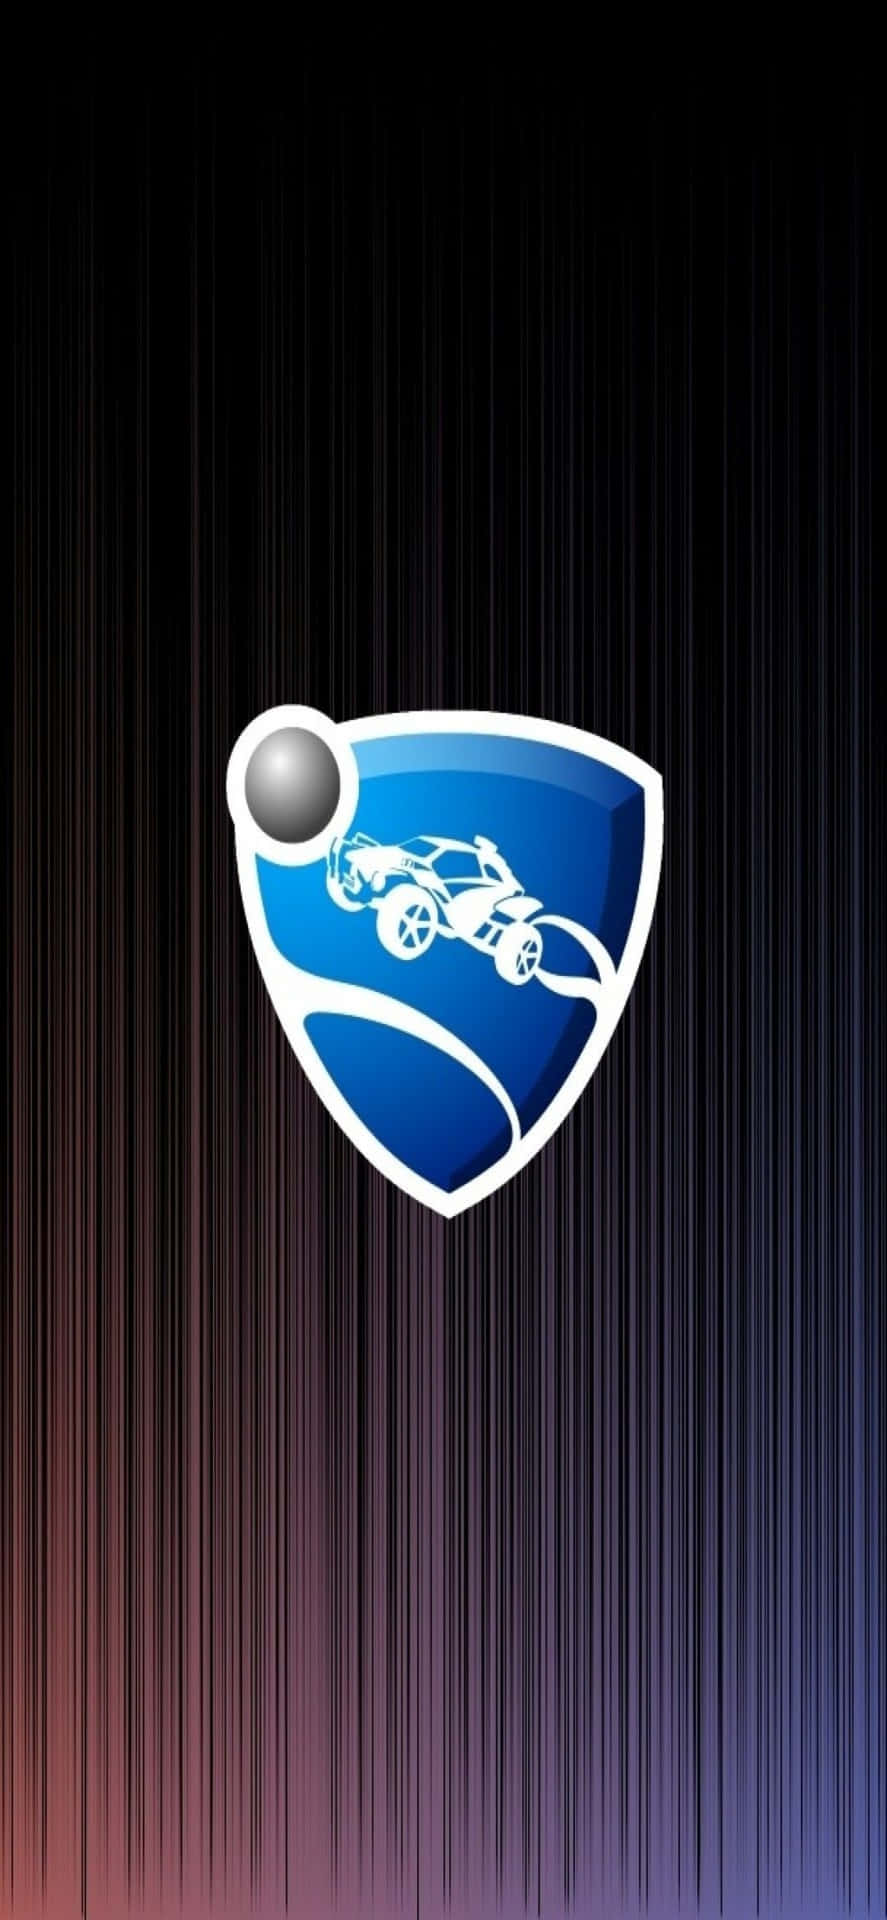 Experience an Exciting Rocket League Match on your Iphone Xs Max